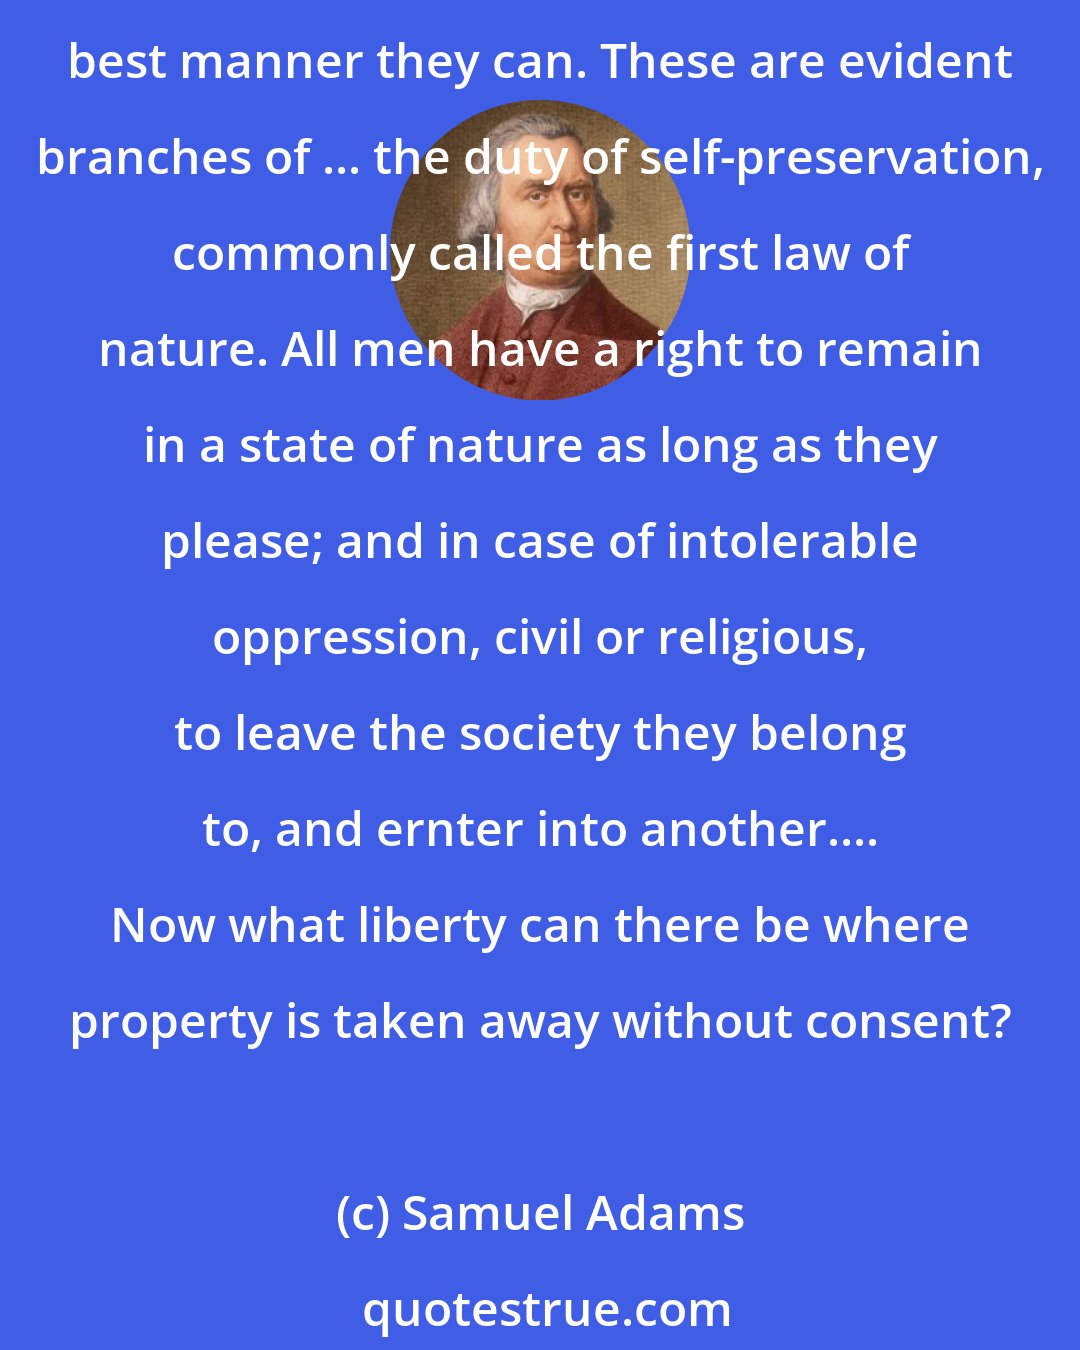 Samuel Adams: Among the natural rights of the colonists are these: first, a right to life; second, to liberty; third, to property; together with the right to support and defend them in the best manner they can. These are evident branches of ... the duty of self-preservation, commonly called the first law of nature. All men have a right to remain in a state of nature as long as they please; and in case of intolerable oppression, civil or religious, to leave the society they belong to, and ernter into another.... Now what liberty can there be where property is taken away without consent?